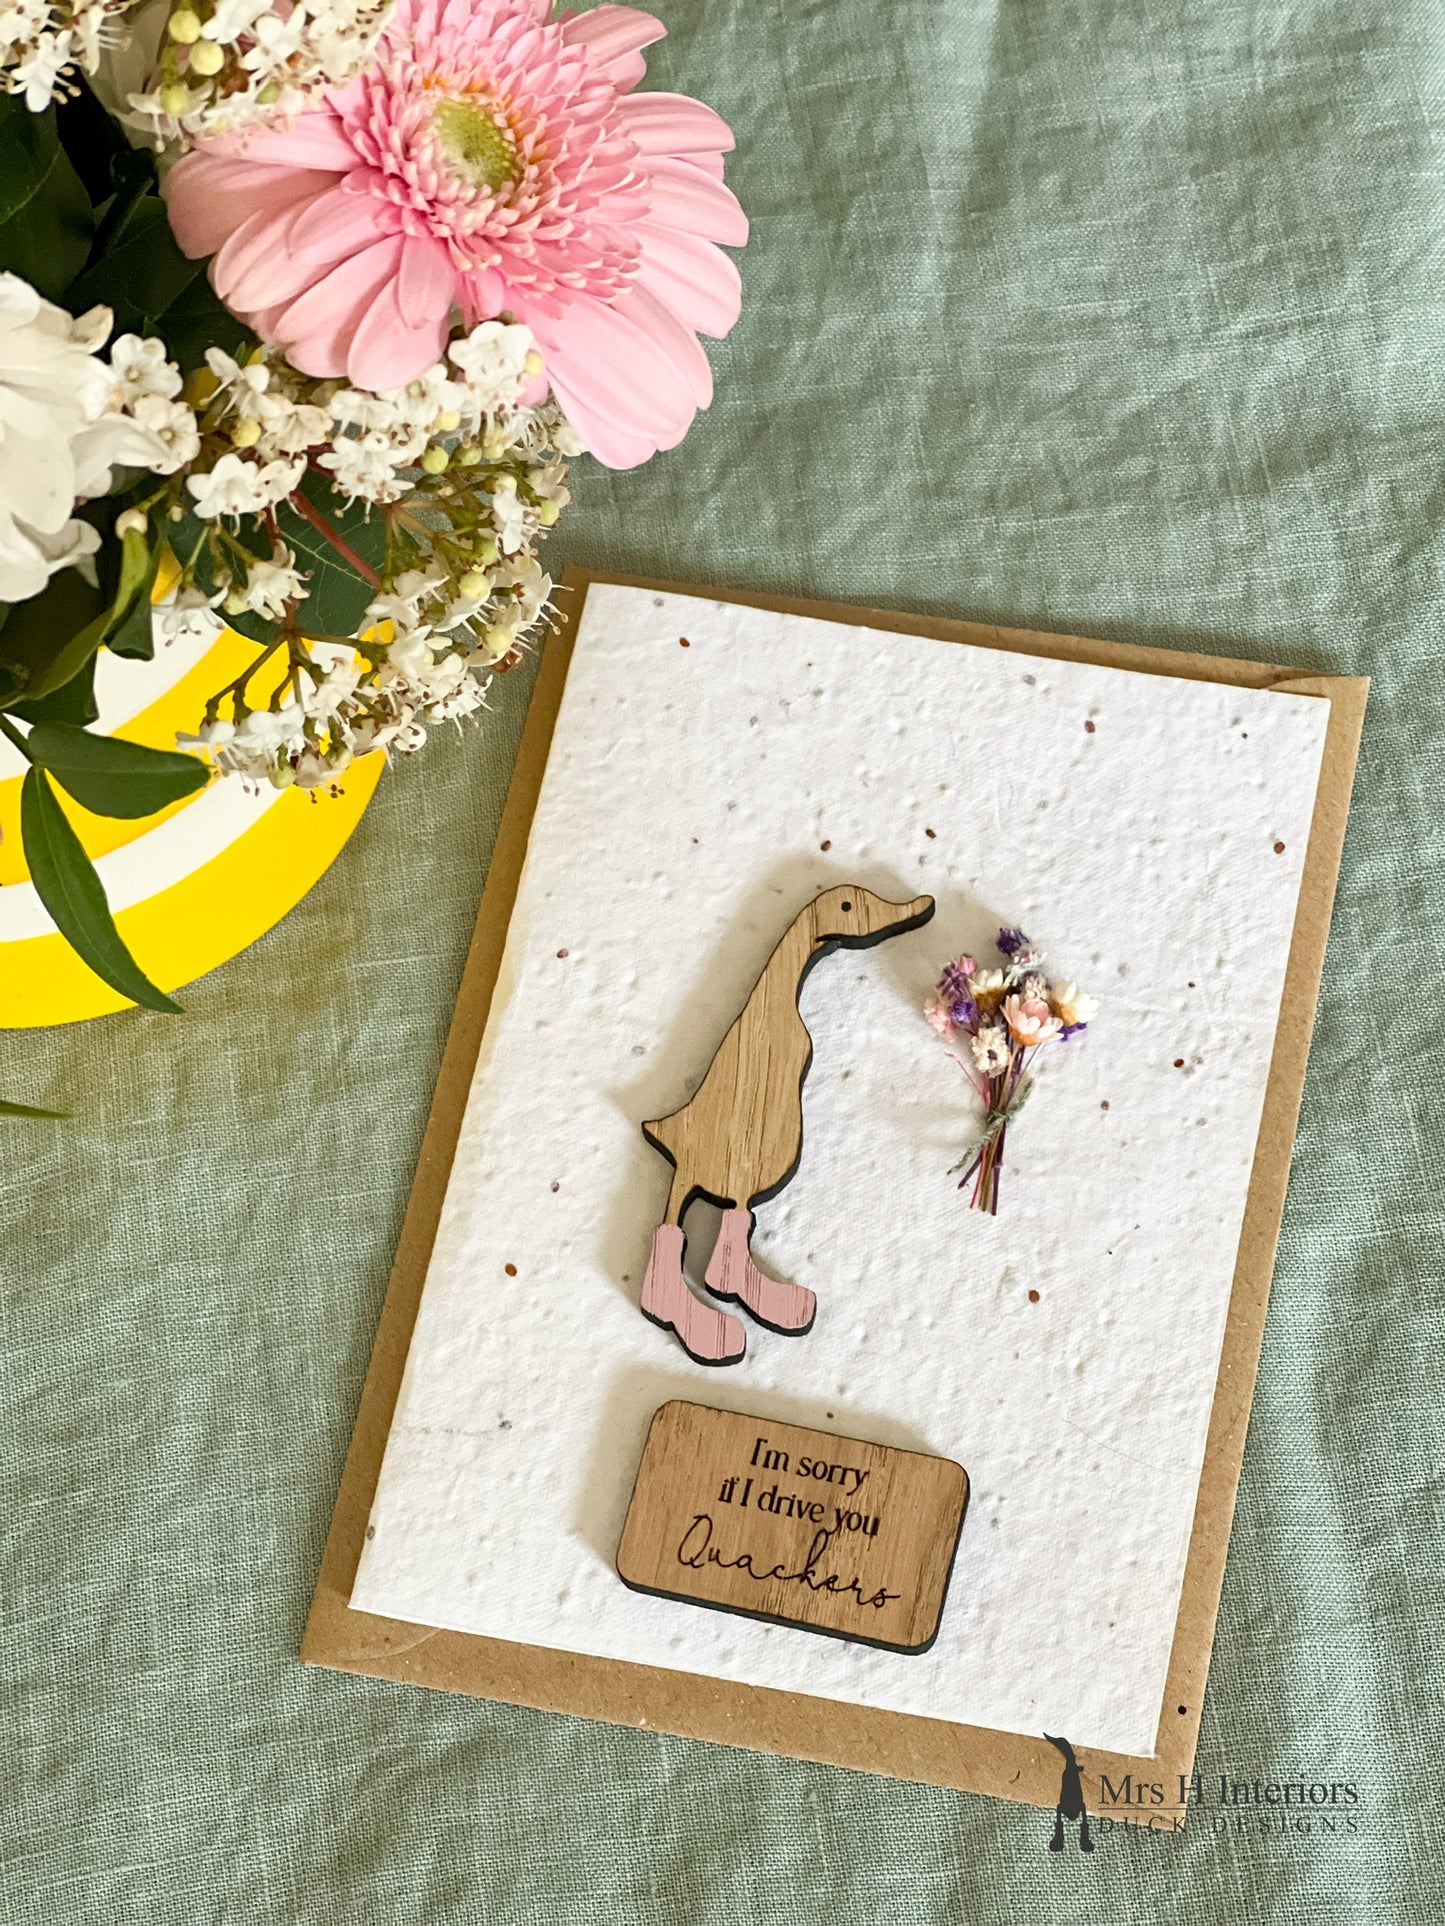 I'm Sorry If I Drive You Quackers - Duck with Flowers -Sorry Card - Decorated Wooden Duck in Boots by Mrs H the Duck Lady